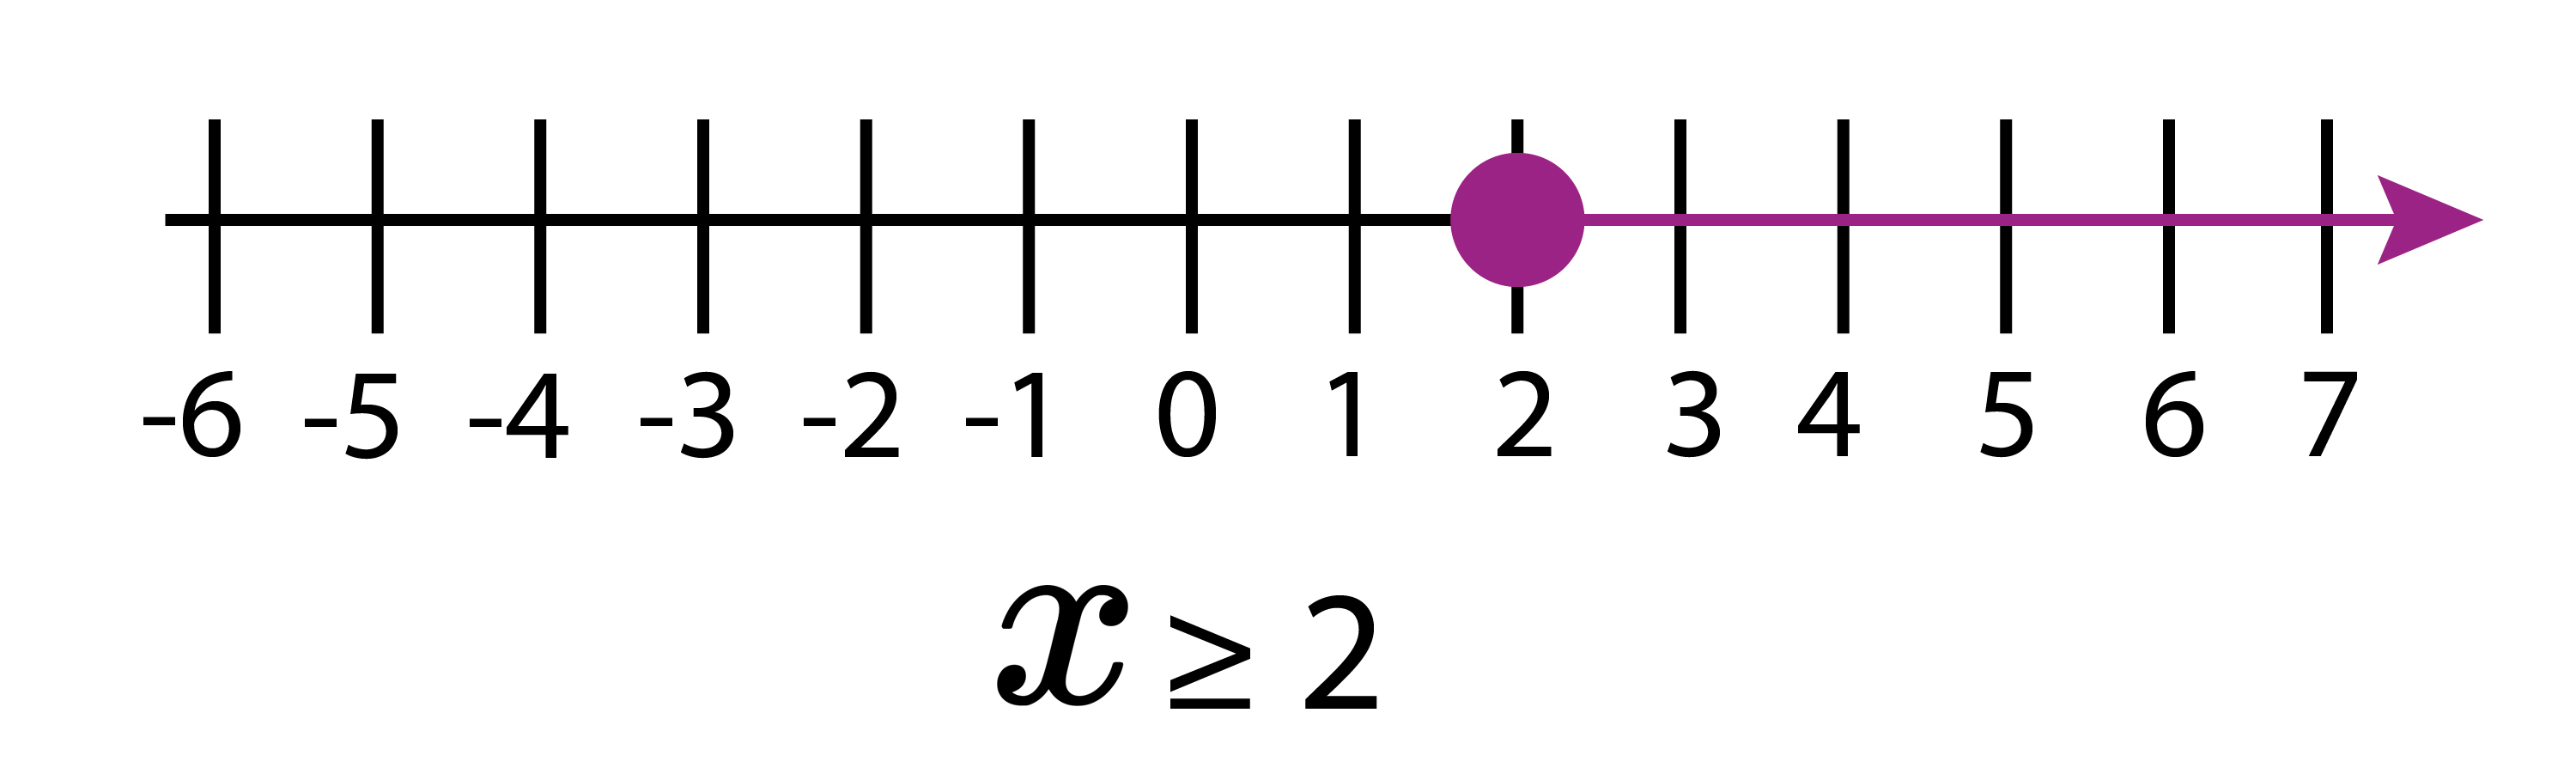 On the number line x is greater than or equal to 2